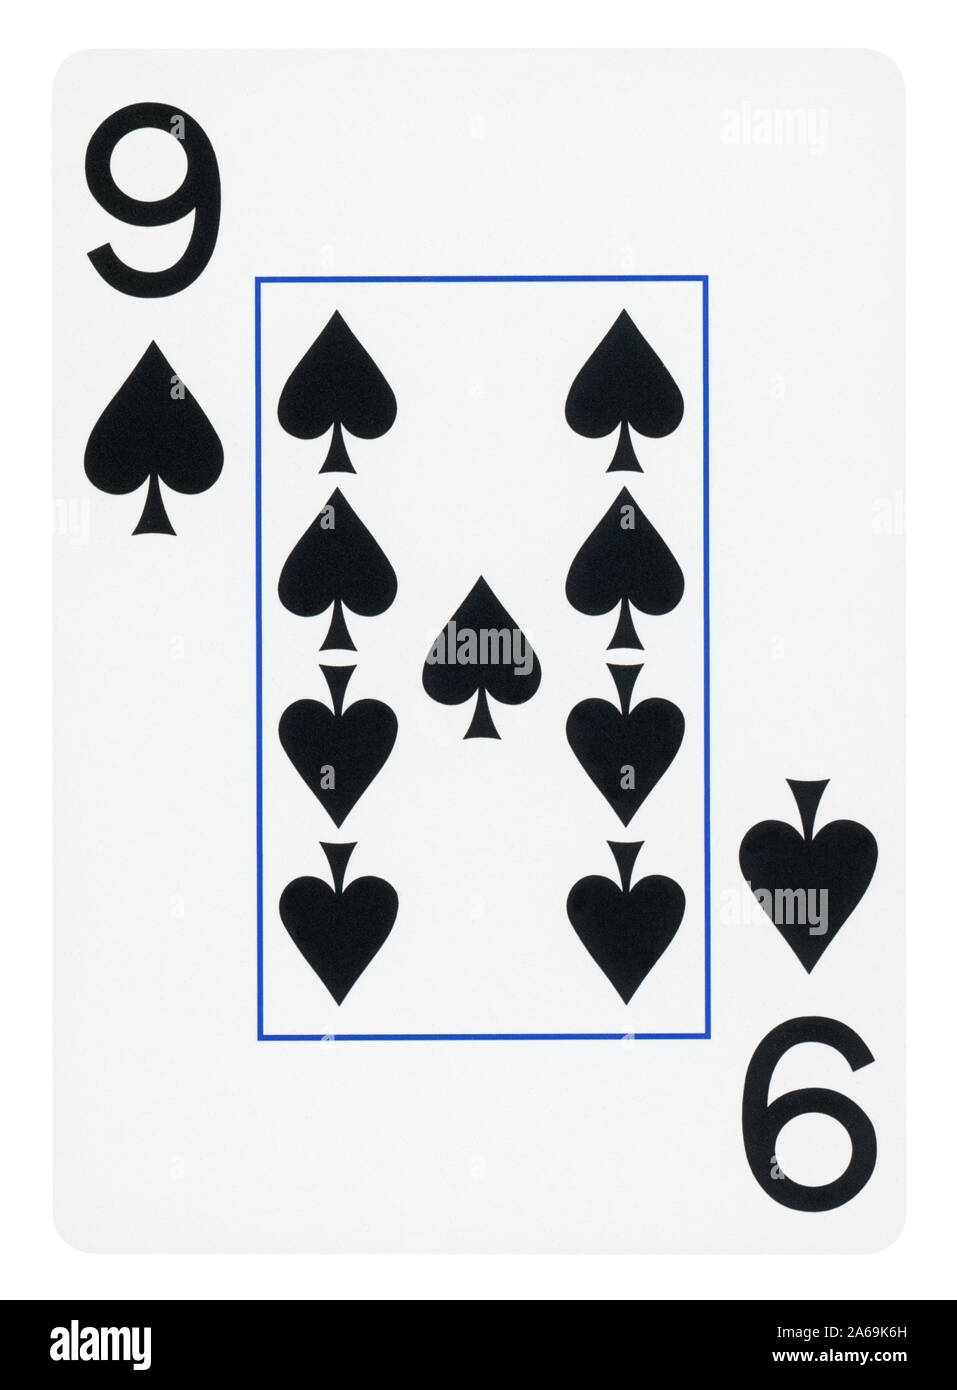 Nine Of Spades High Resolution Stock Photography and Images - Alamy